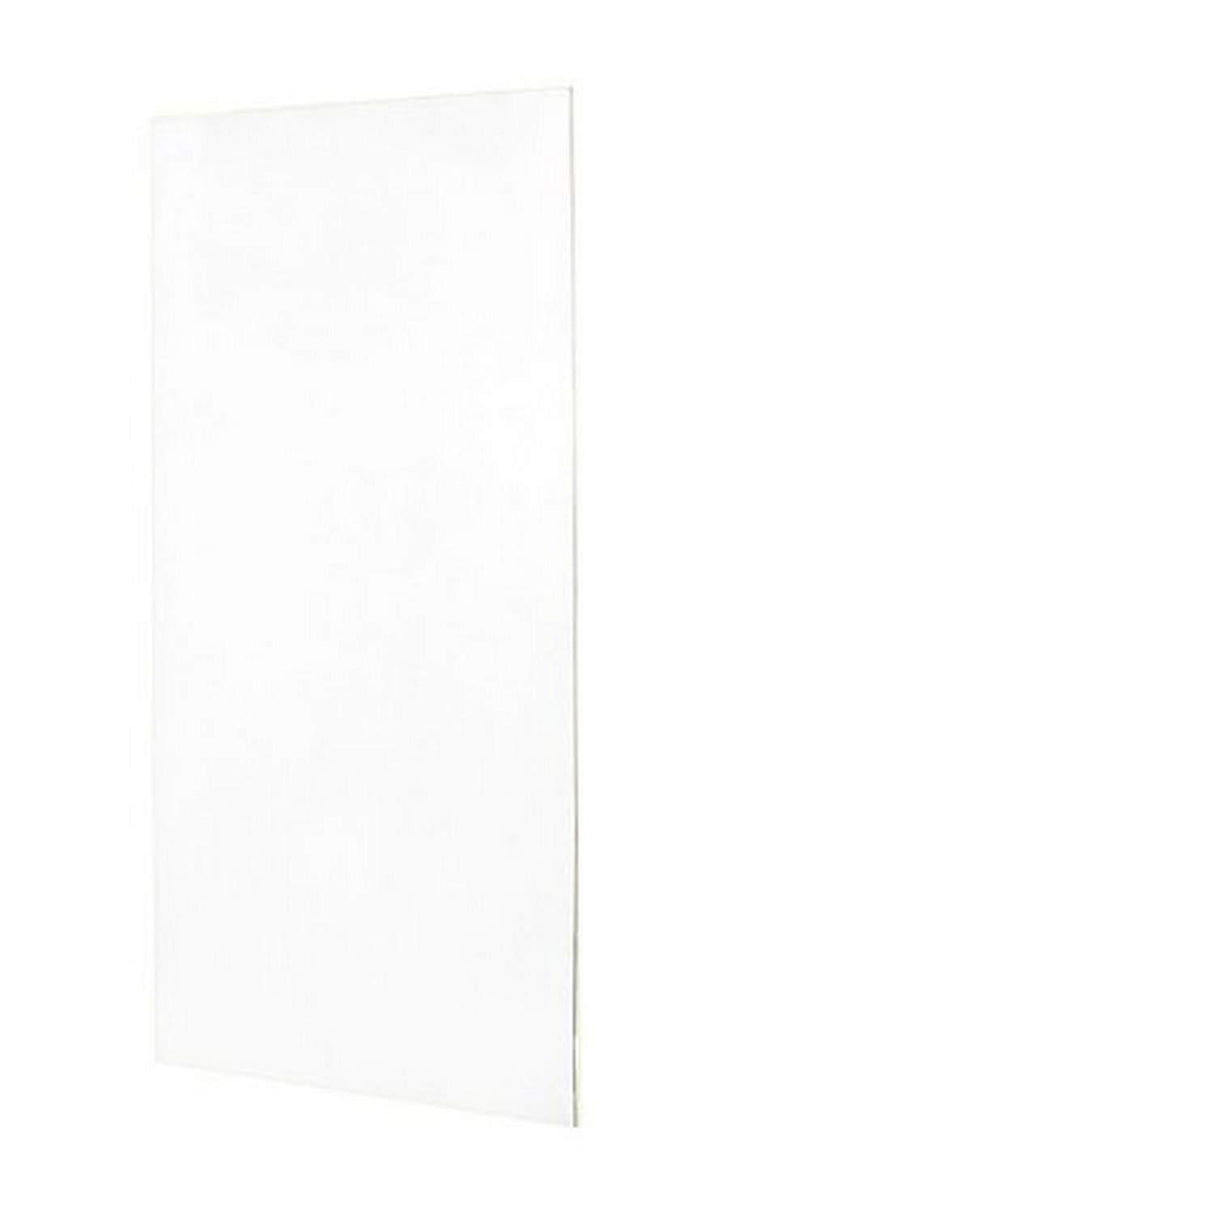 Swanstone SS-3696-1 36 x 96 Swanstone Smooth Glue up Bathtub and Shower Single Wall Panel in White SS0369601.010